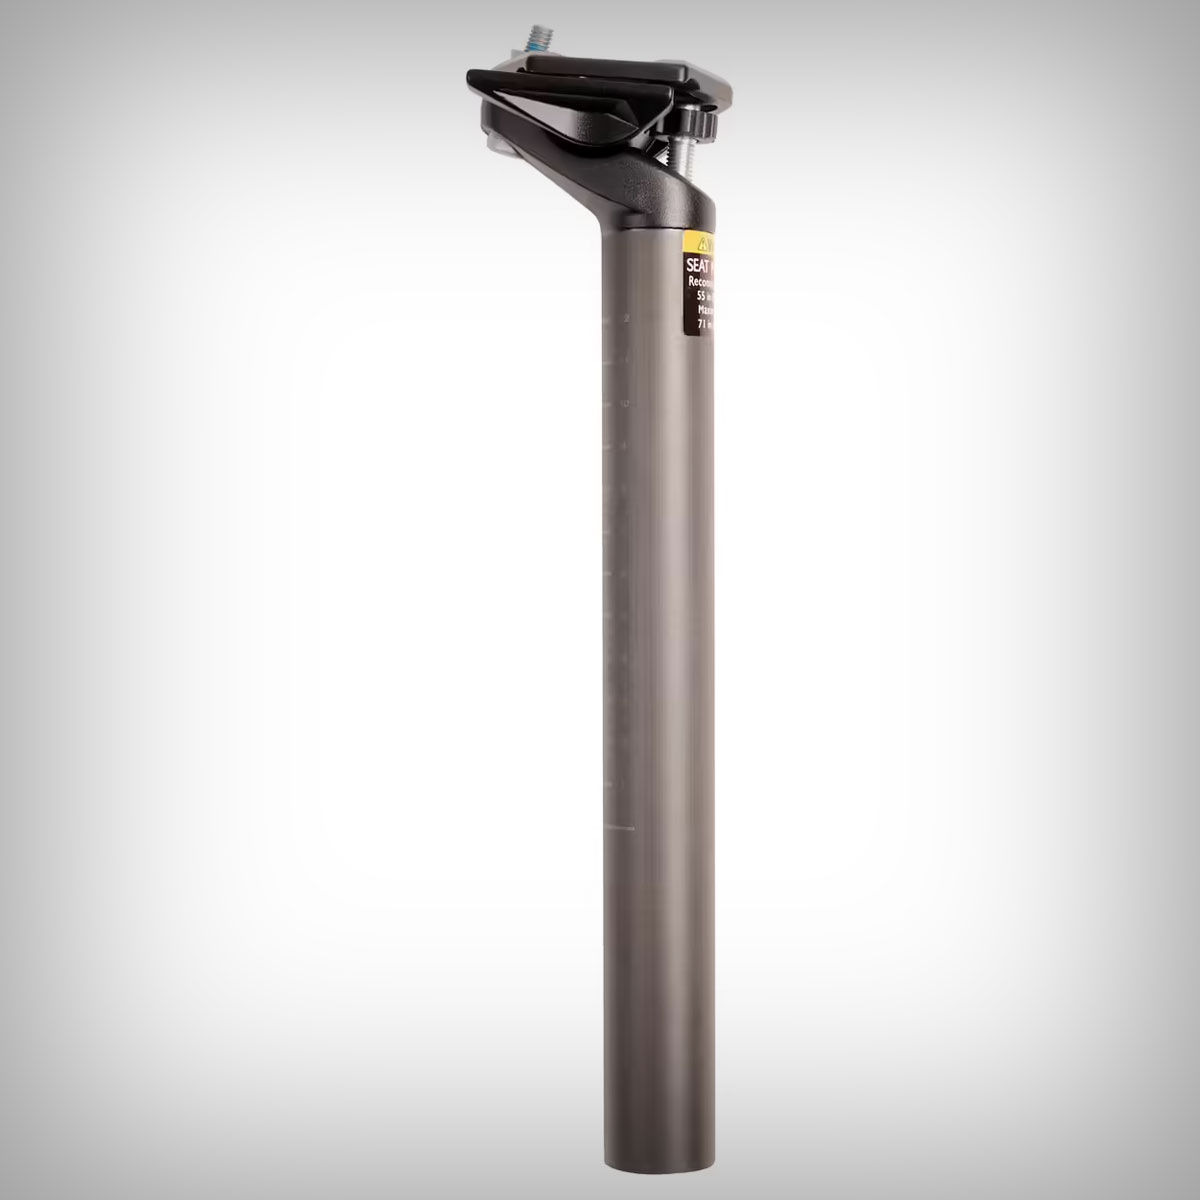 Hunting for Deals: A Rockrider Carbon Seatpost with a 27.2 mm Diameter for Under 35 Euros While Stocks Last